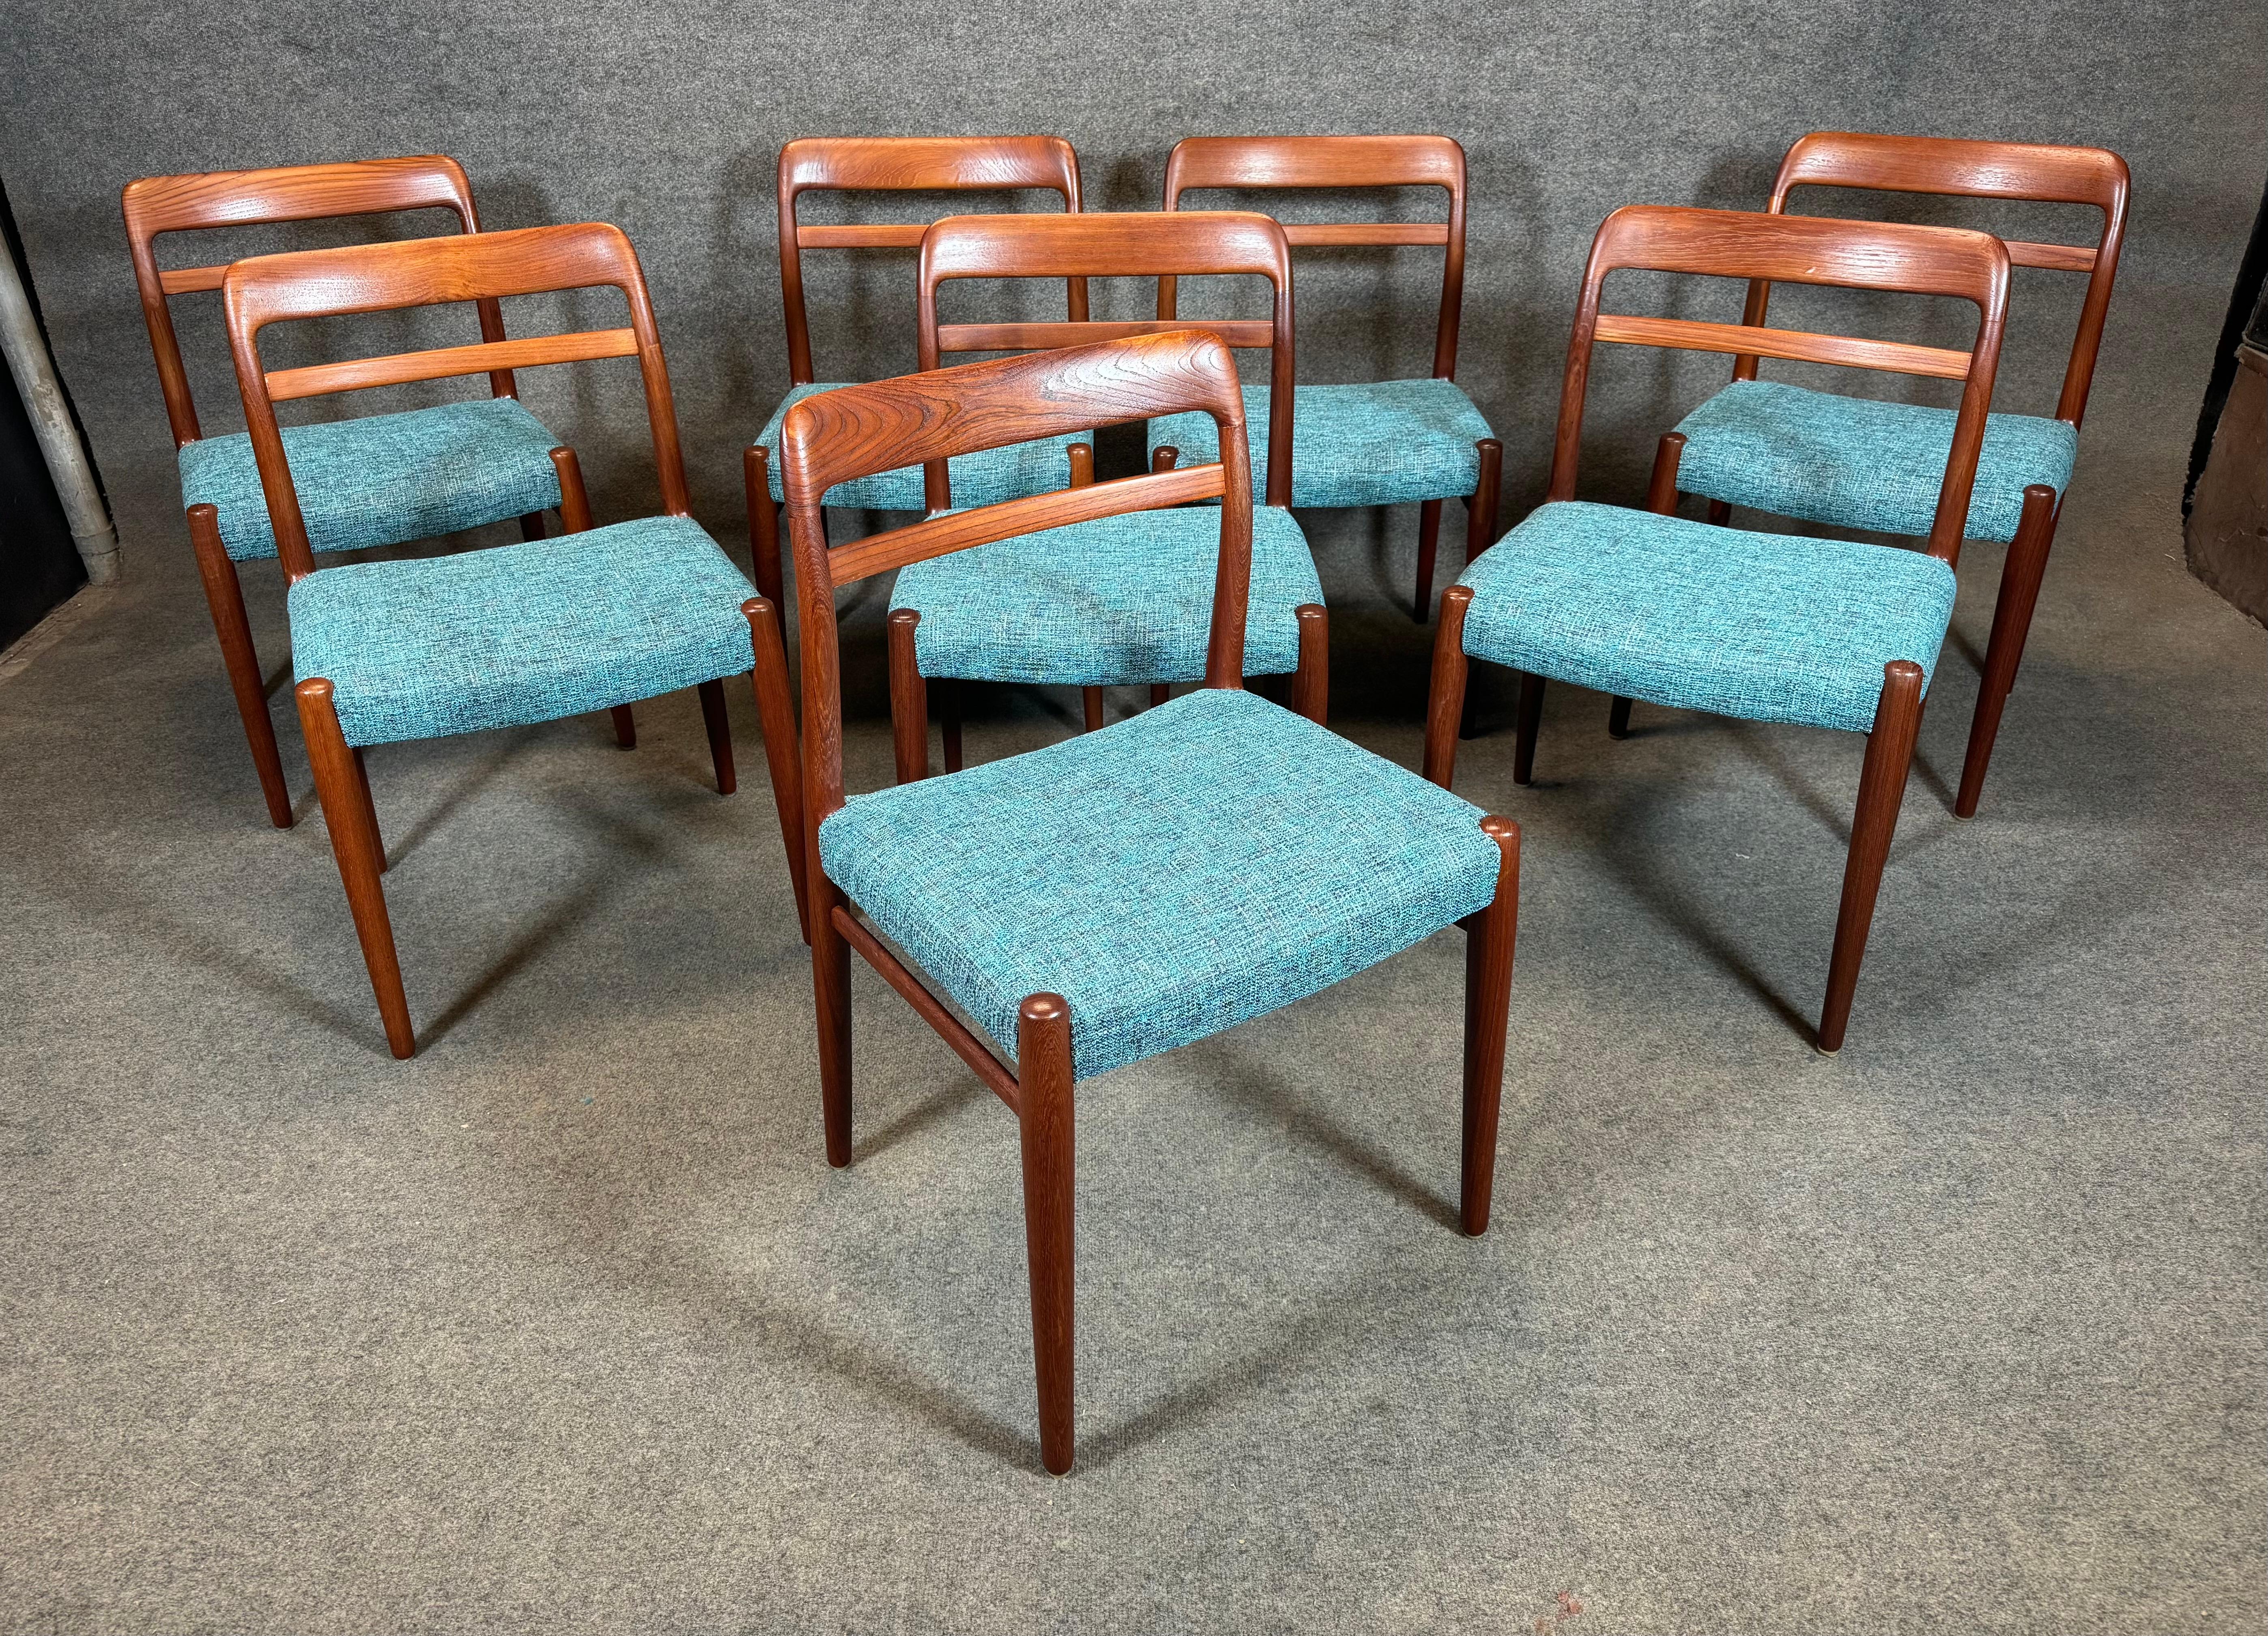 Here is a beautiful set of 8 vintage Scandinavian modern teak dining chairs Model 145 designed by Alf Aarseth and manufactured by Gustav Bahus in Norway in the 1960's.
This exclusive set of comfortable chairs, recently imported from Europe to